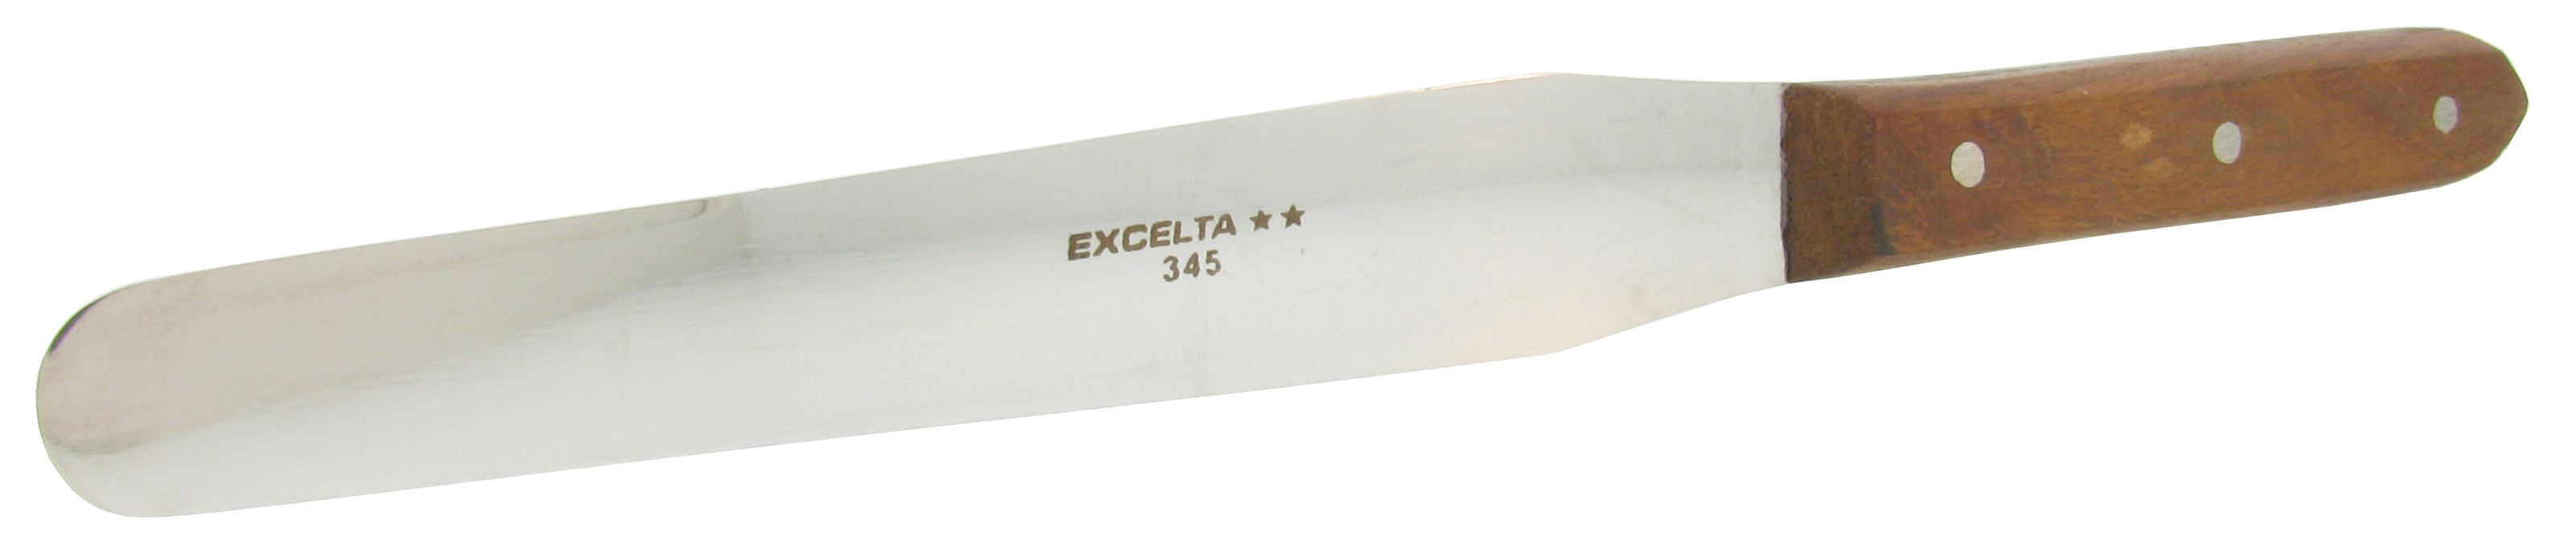 Excelta 345 8.5inch Stainless Steel Mixing Spatula With Wooden Handle